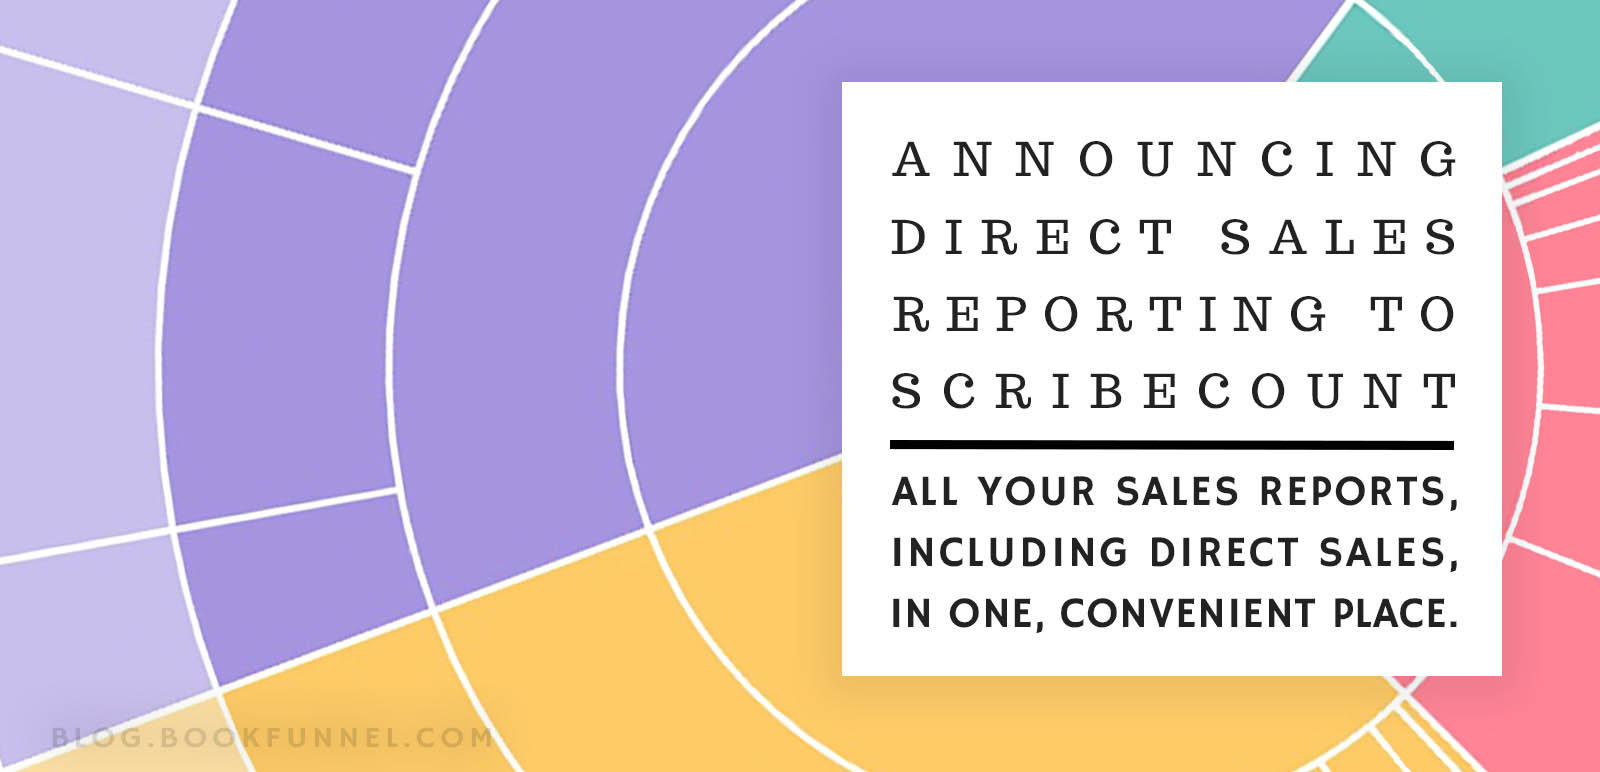 Announcing Direct Sales Reporting to ScribeCount